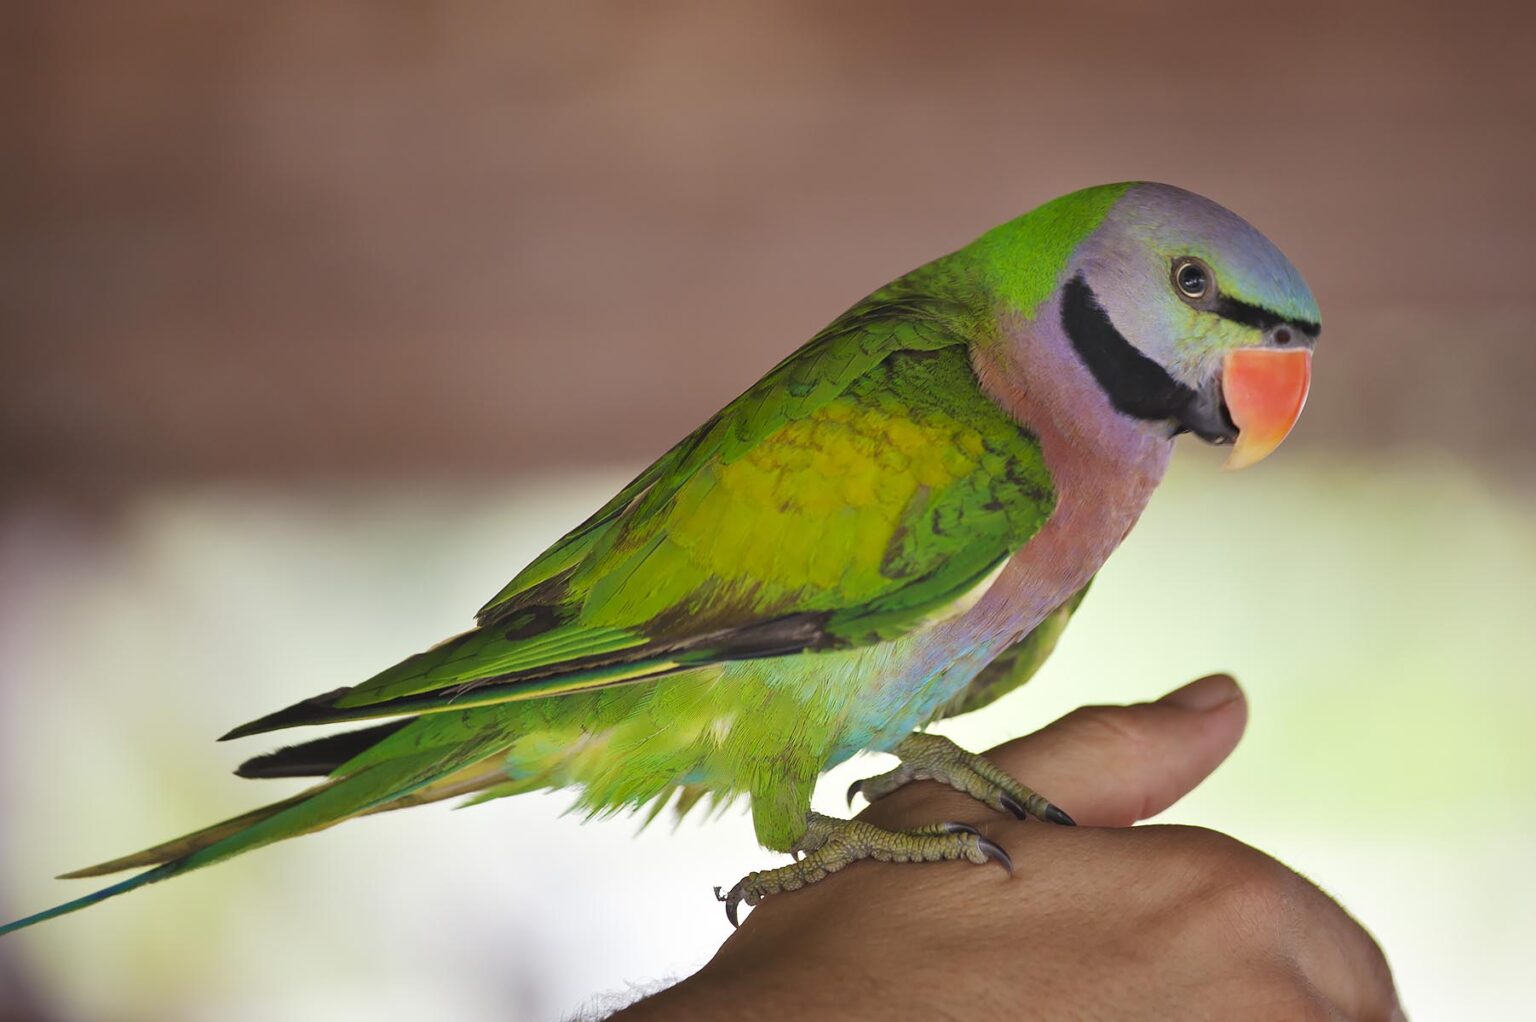 A PARAKEET on KOH PHRA THONG ISLAND located in the Andaman Sea - THAILAND